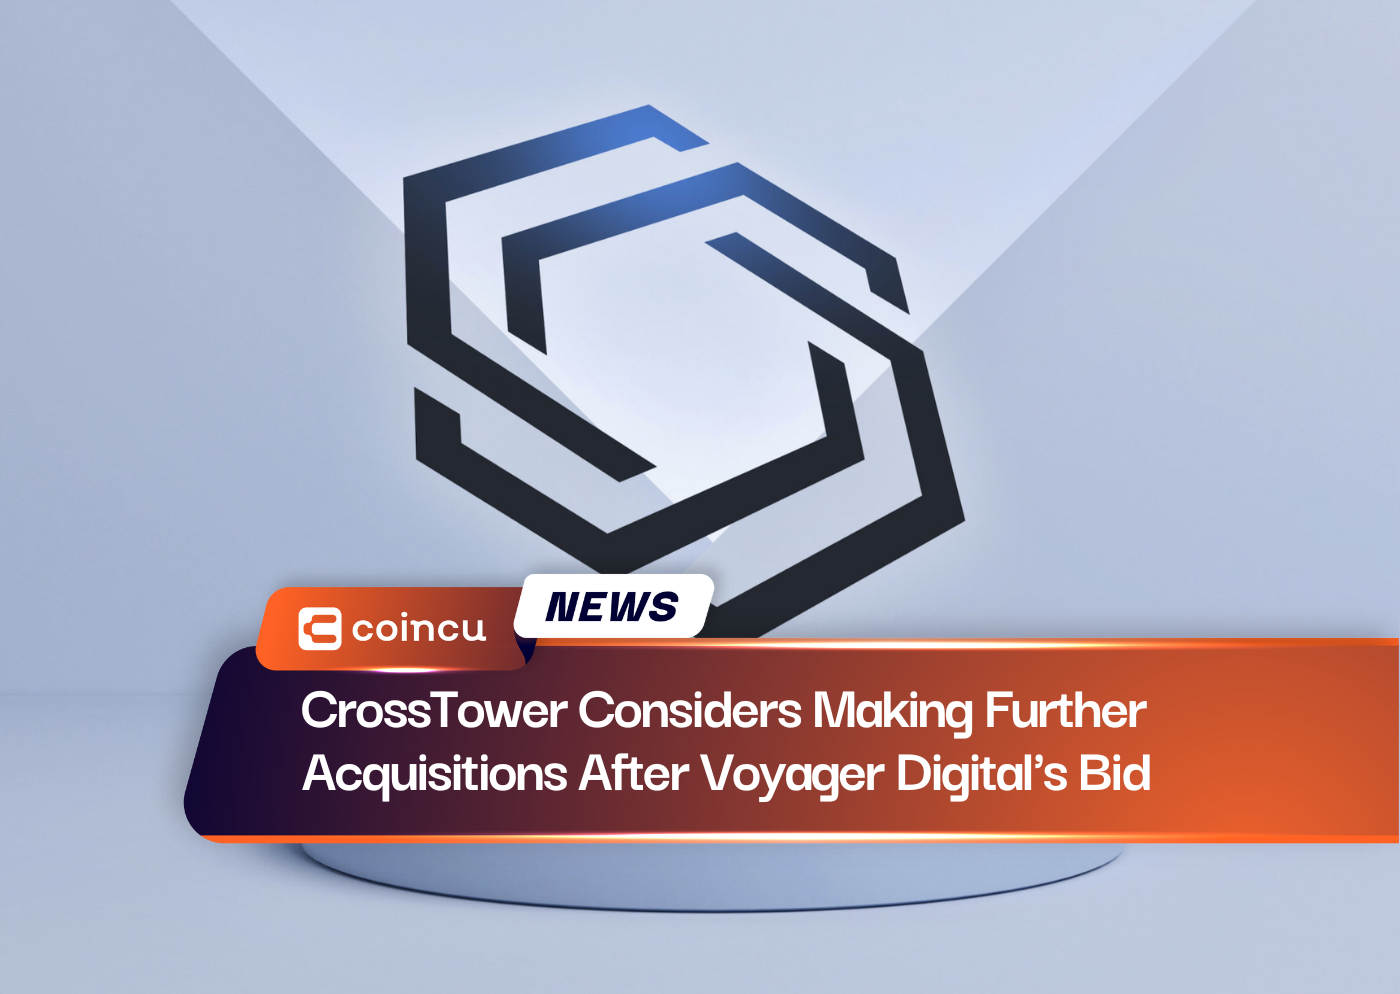 CrossTower Considers Making Further Acquisitions After Voyager Digital's Bid